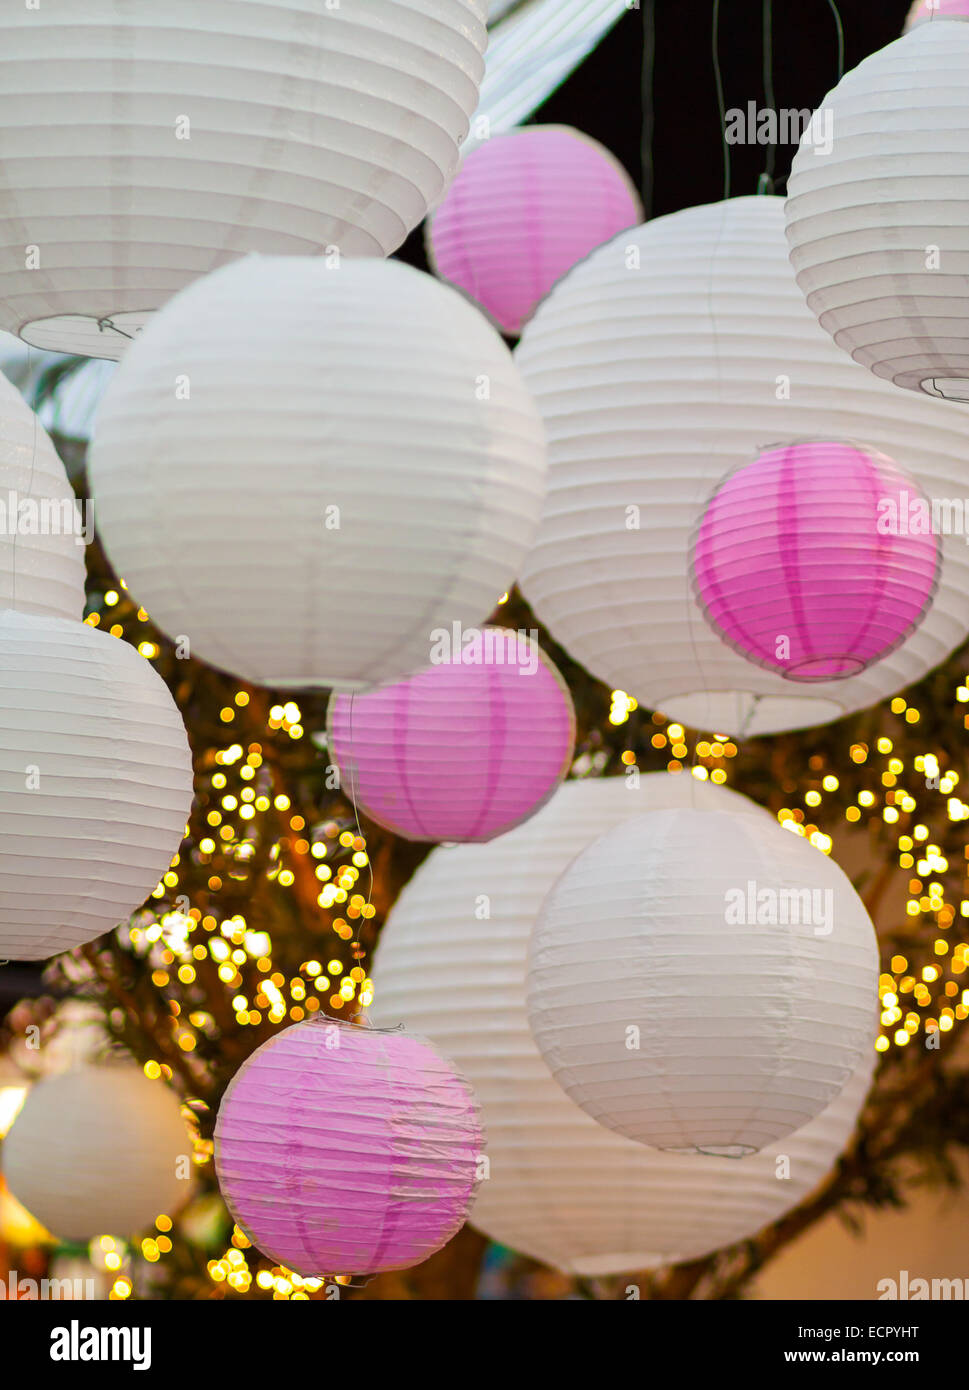 White And Pink Light Balls Hanging On A Ceiling With